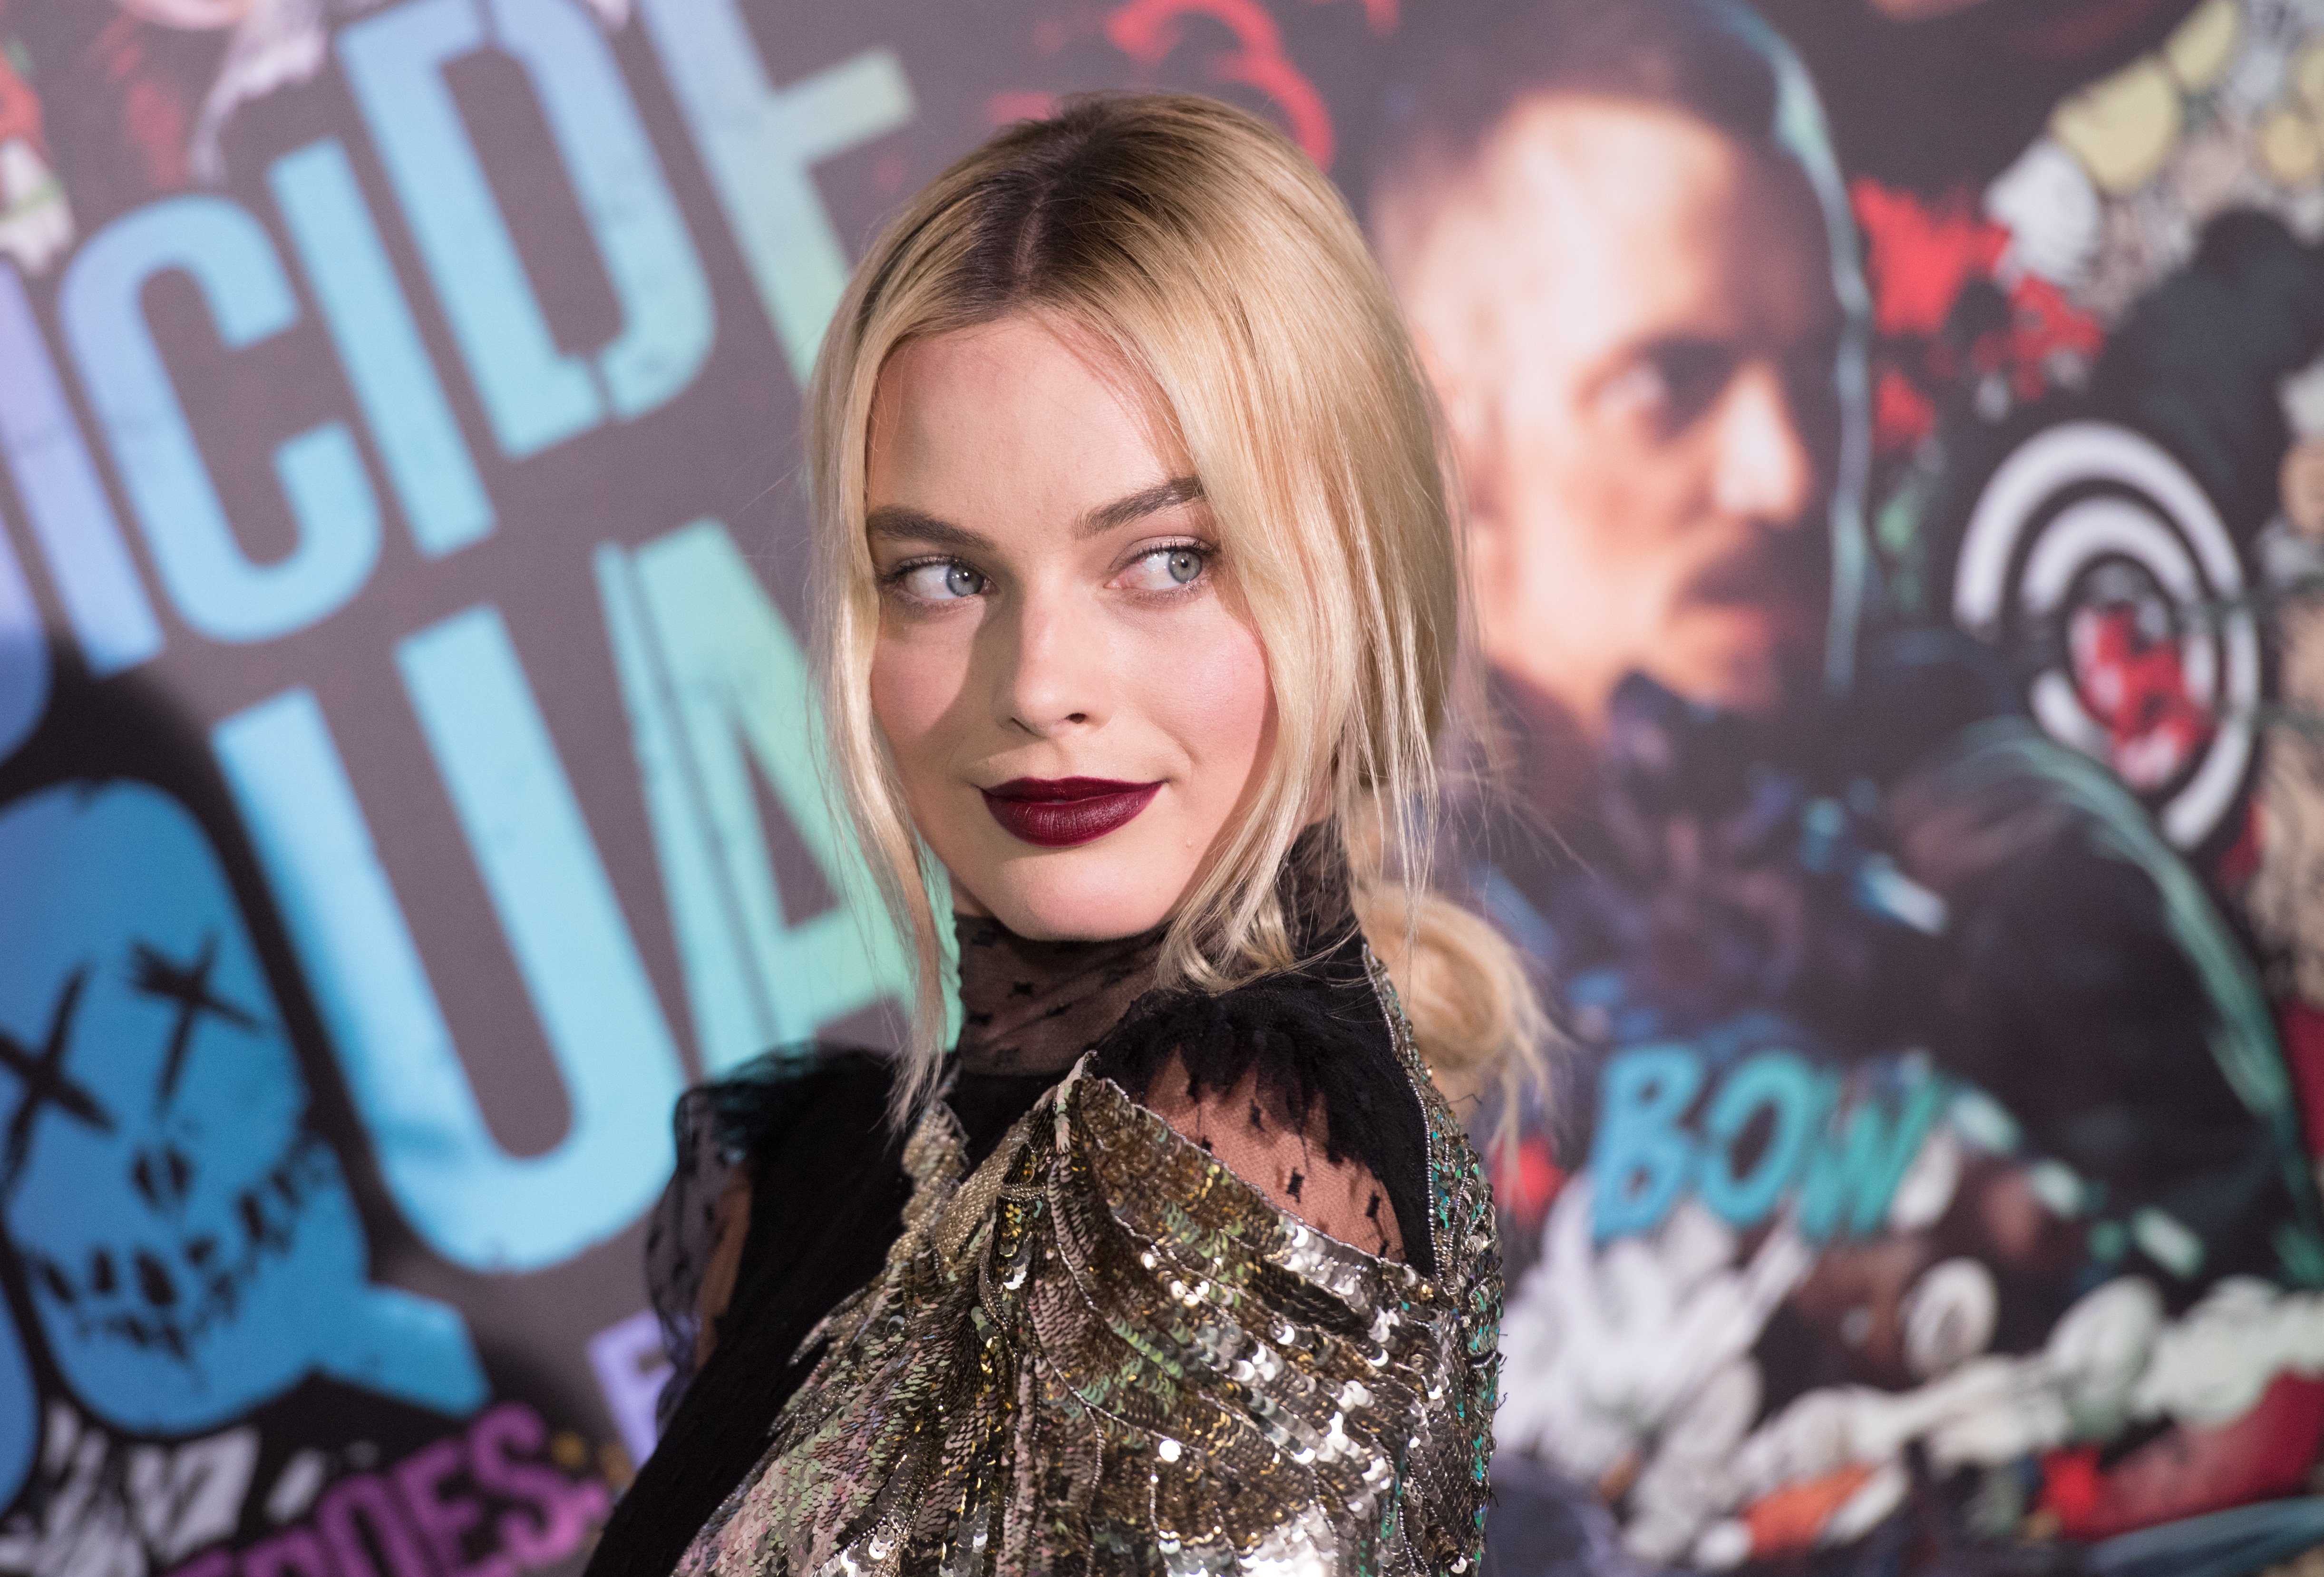 Margot Robbie at the world premiere of "Suicide Squad" at The Beacon Theatre on August 1, 2016 in New York City | Source: Getty Images)